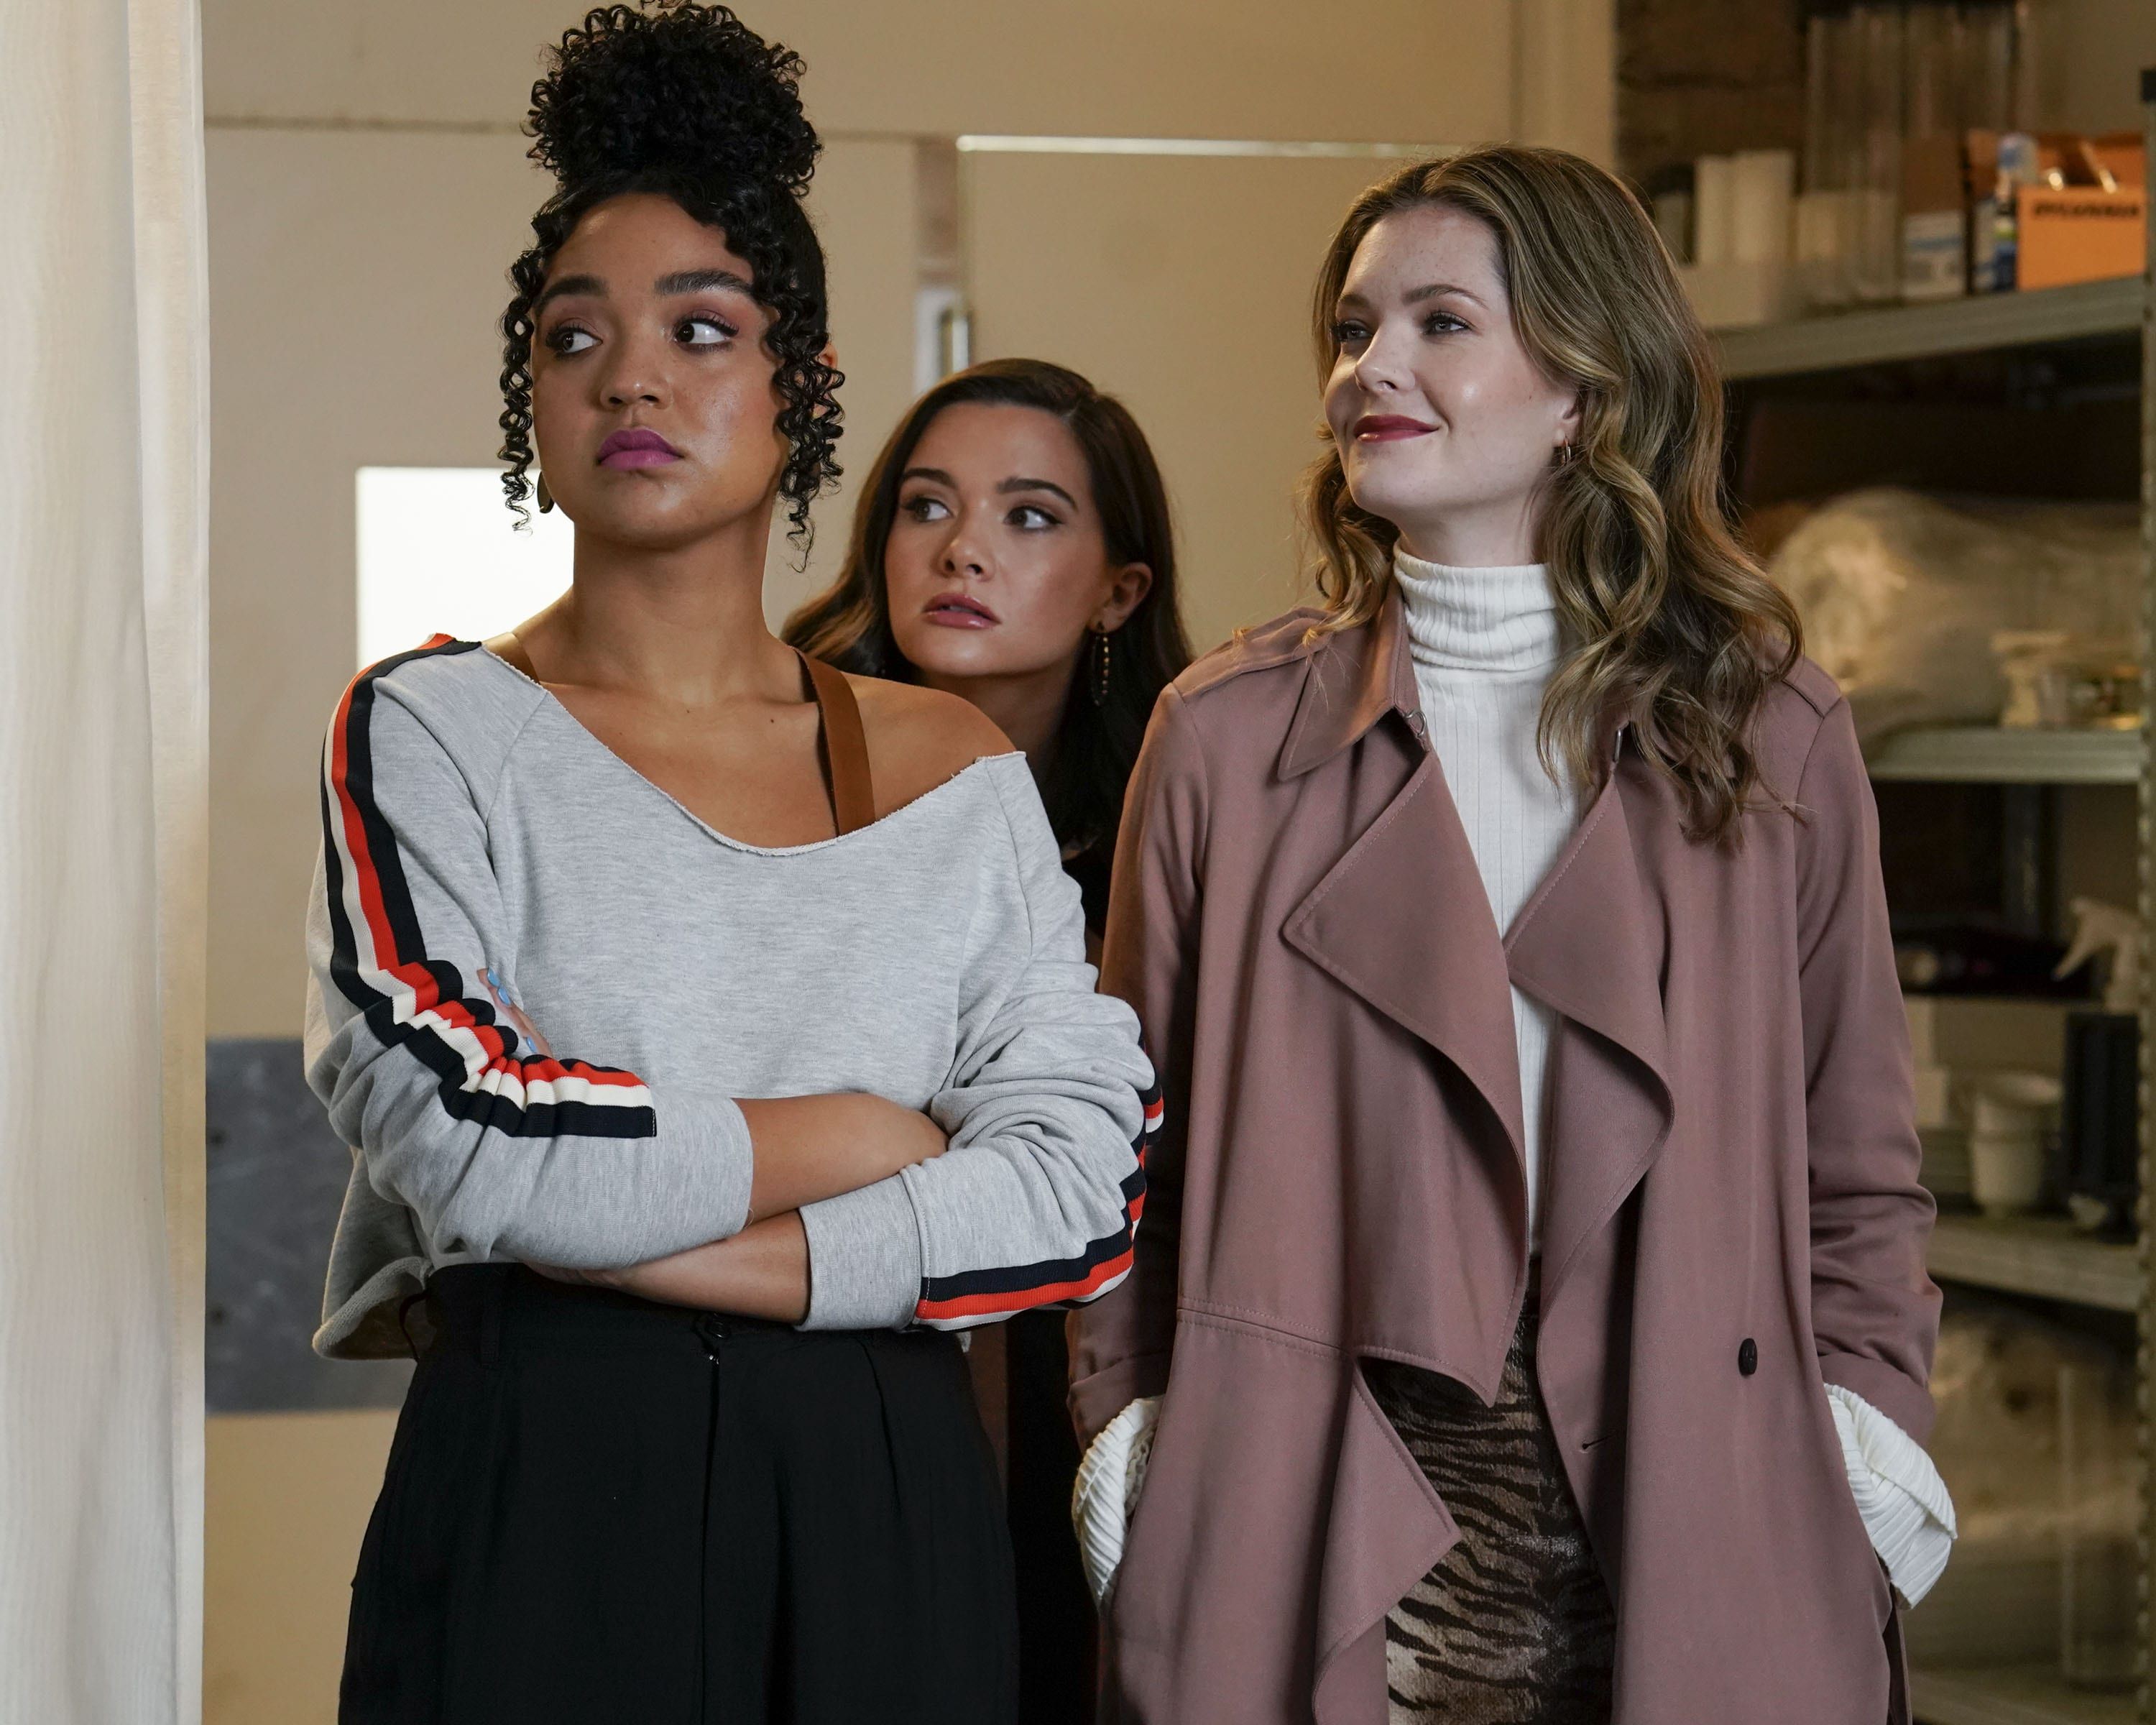 Kat, Sutton, and Jane wearing stylish warm clothing looking to their right with mixed reactions on their faces, they are in a building with supplies behind them.